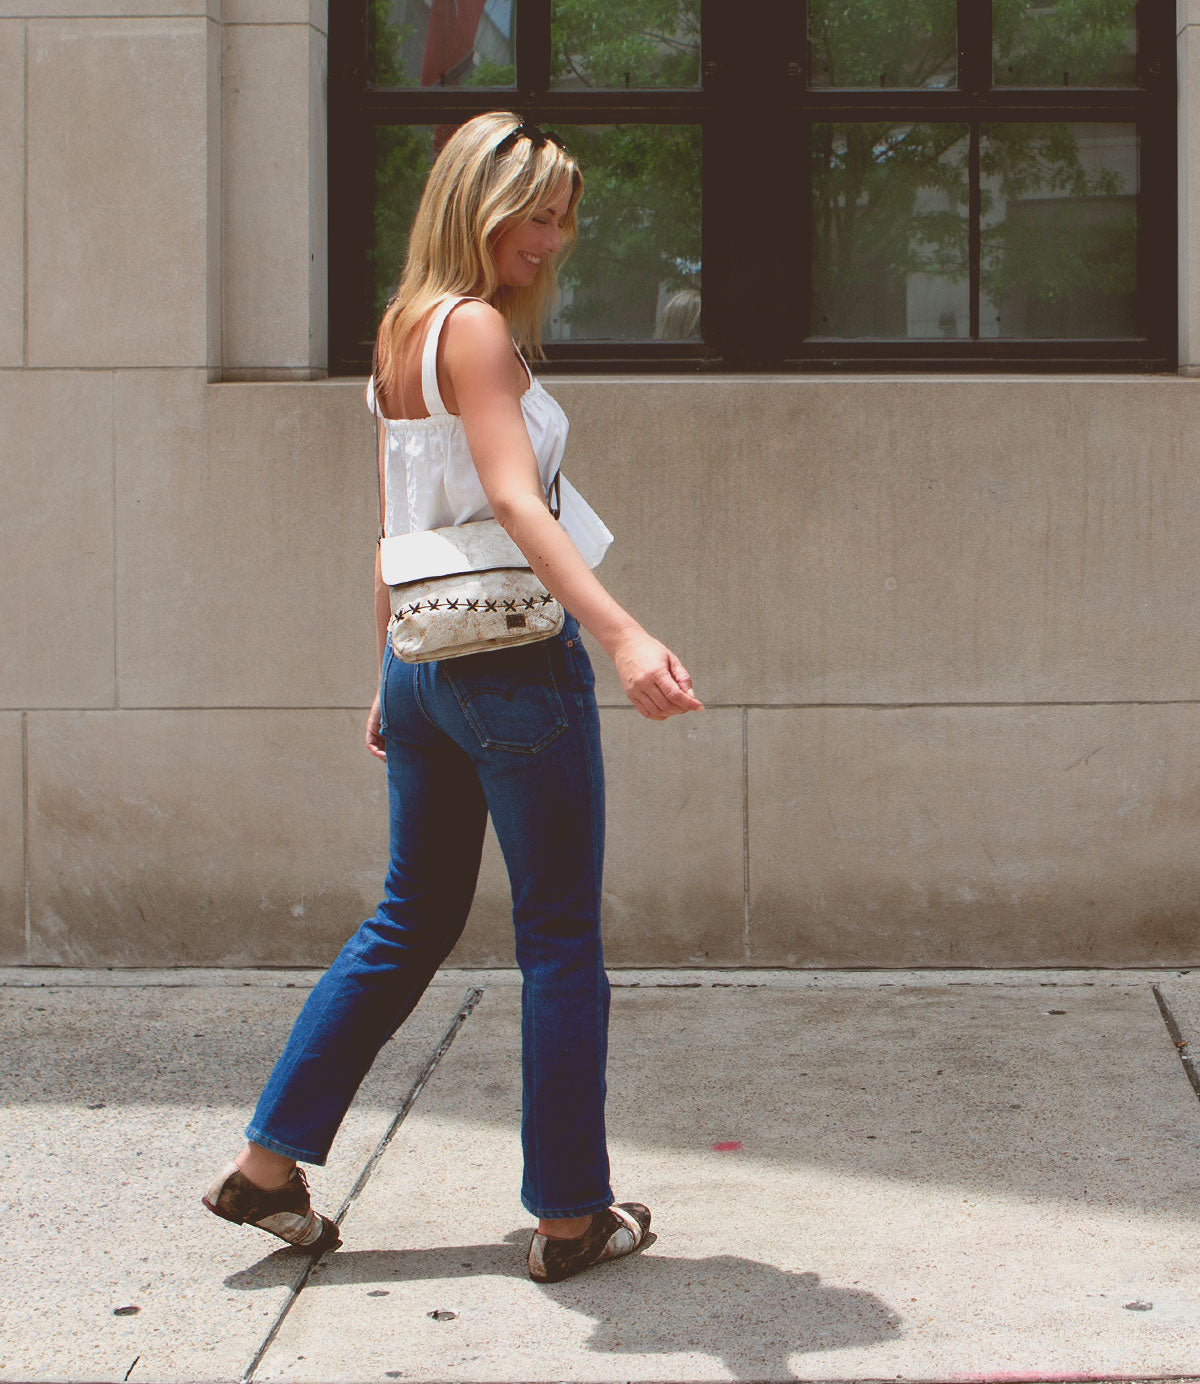 A woman with blonde hair walks on a sidewalk in front of a building, sporting a white top, blue jeans, brown sandals, and a versatile Bed Stu Cleo crossbody bag with a zipper top closure. She is looking down and slightly smiling.